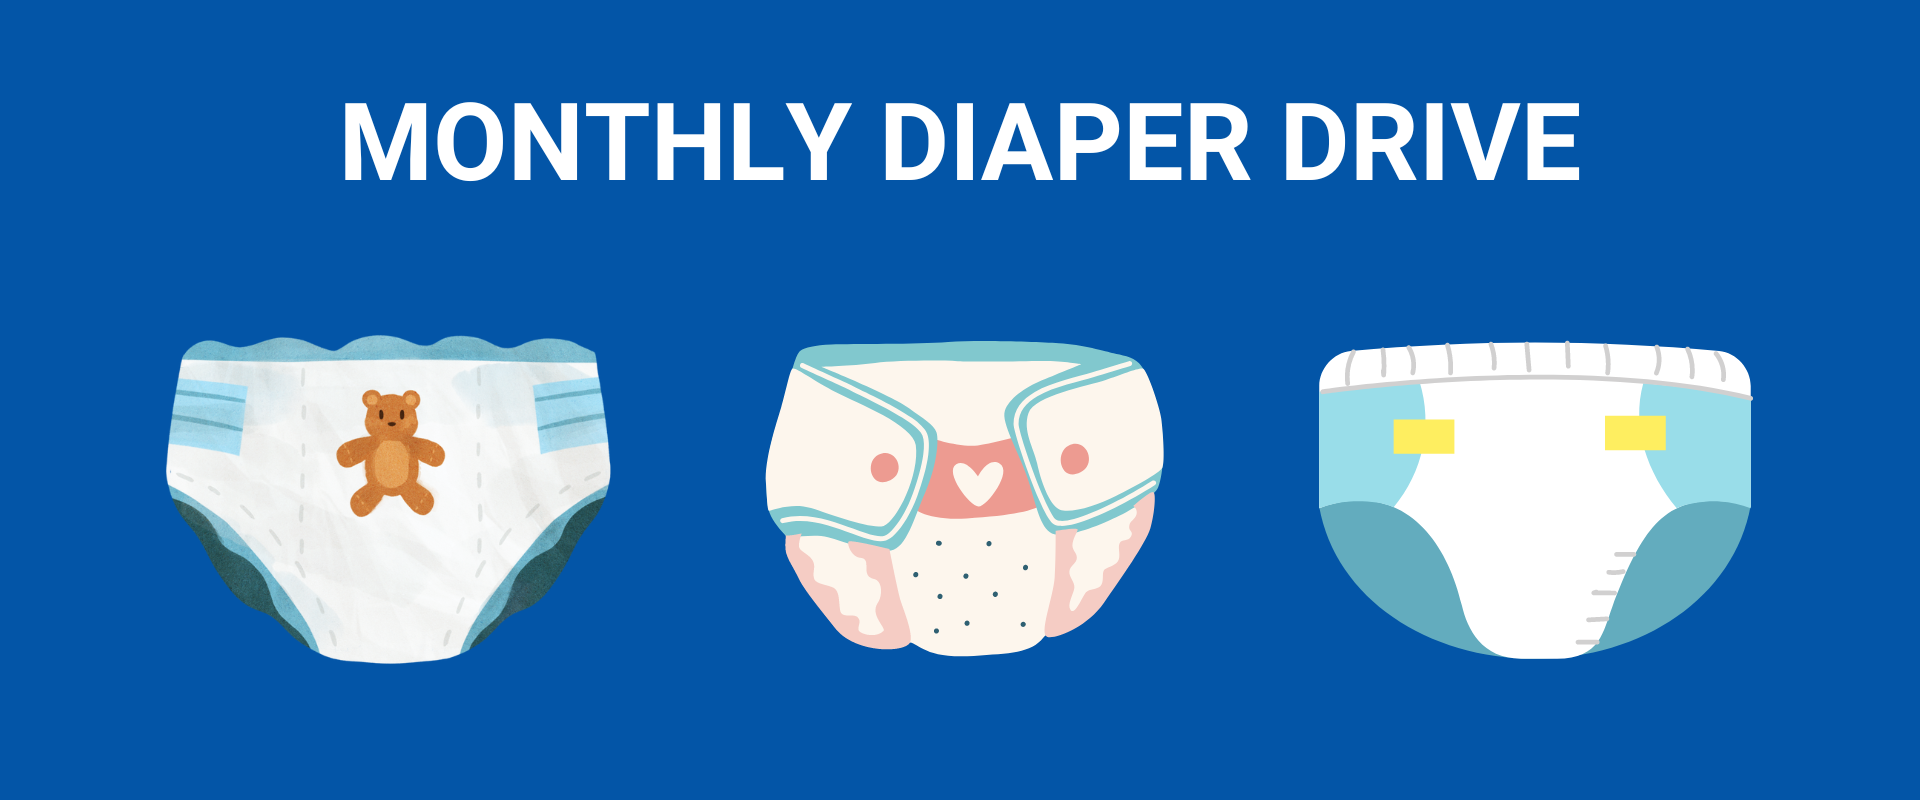 A blue background, three diapers and the text Monthly Diaper Drive